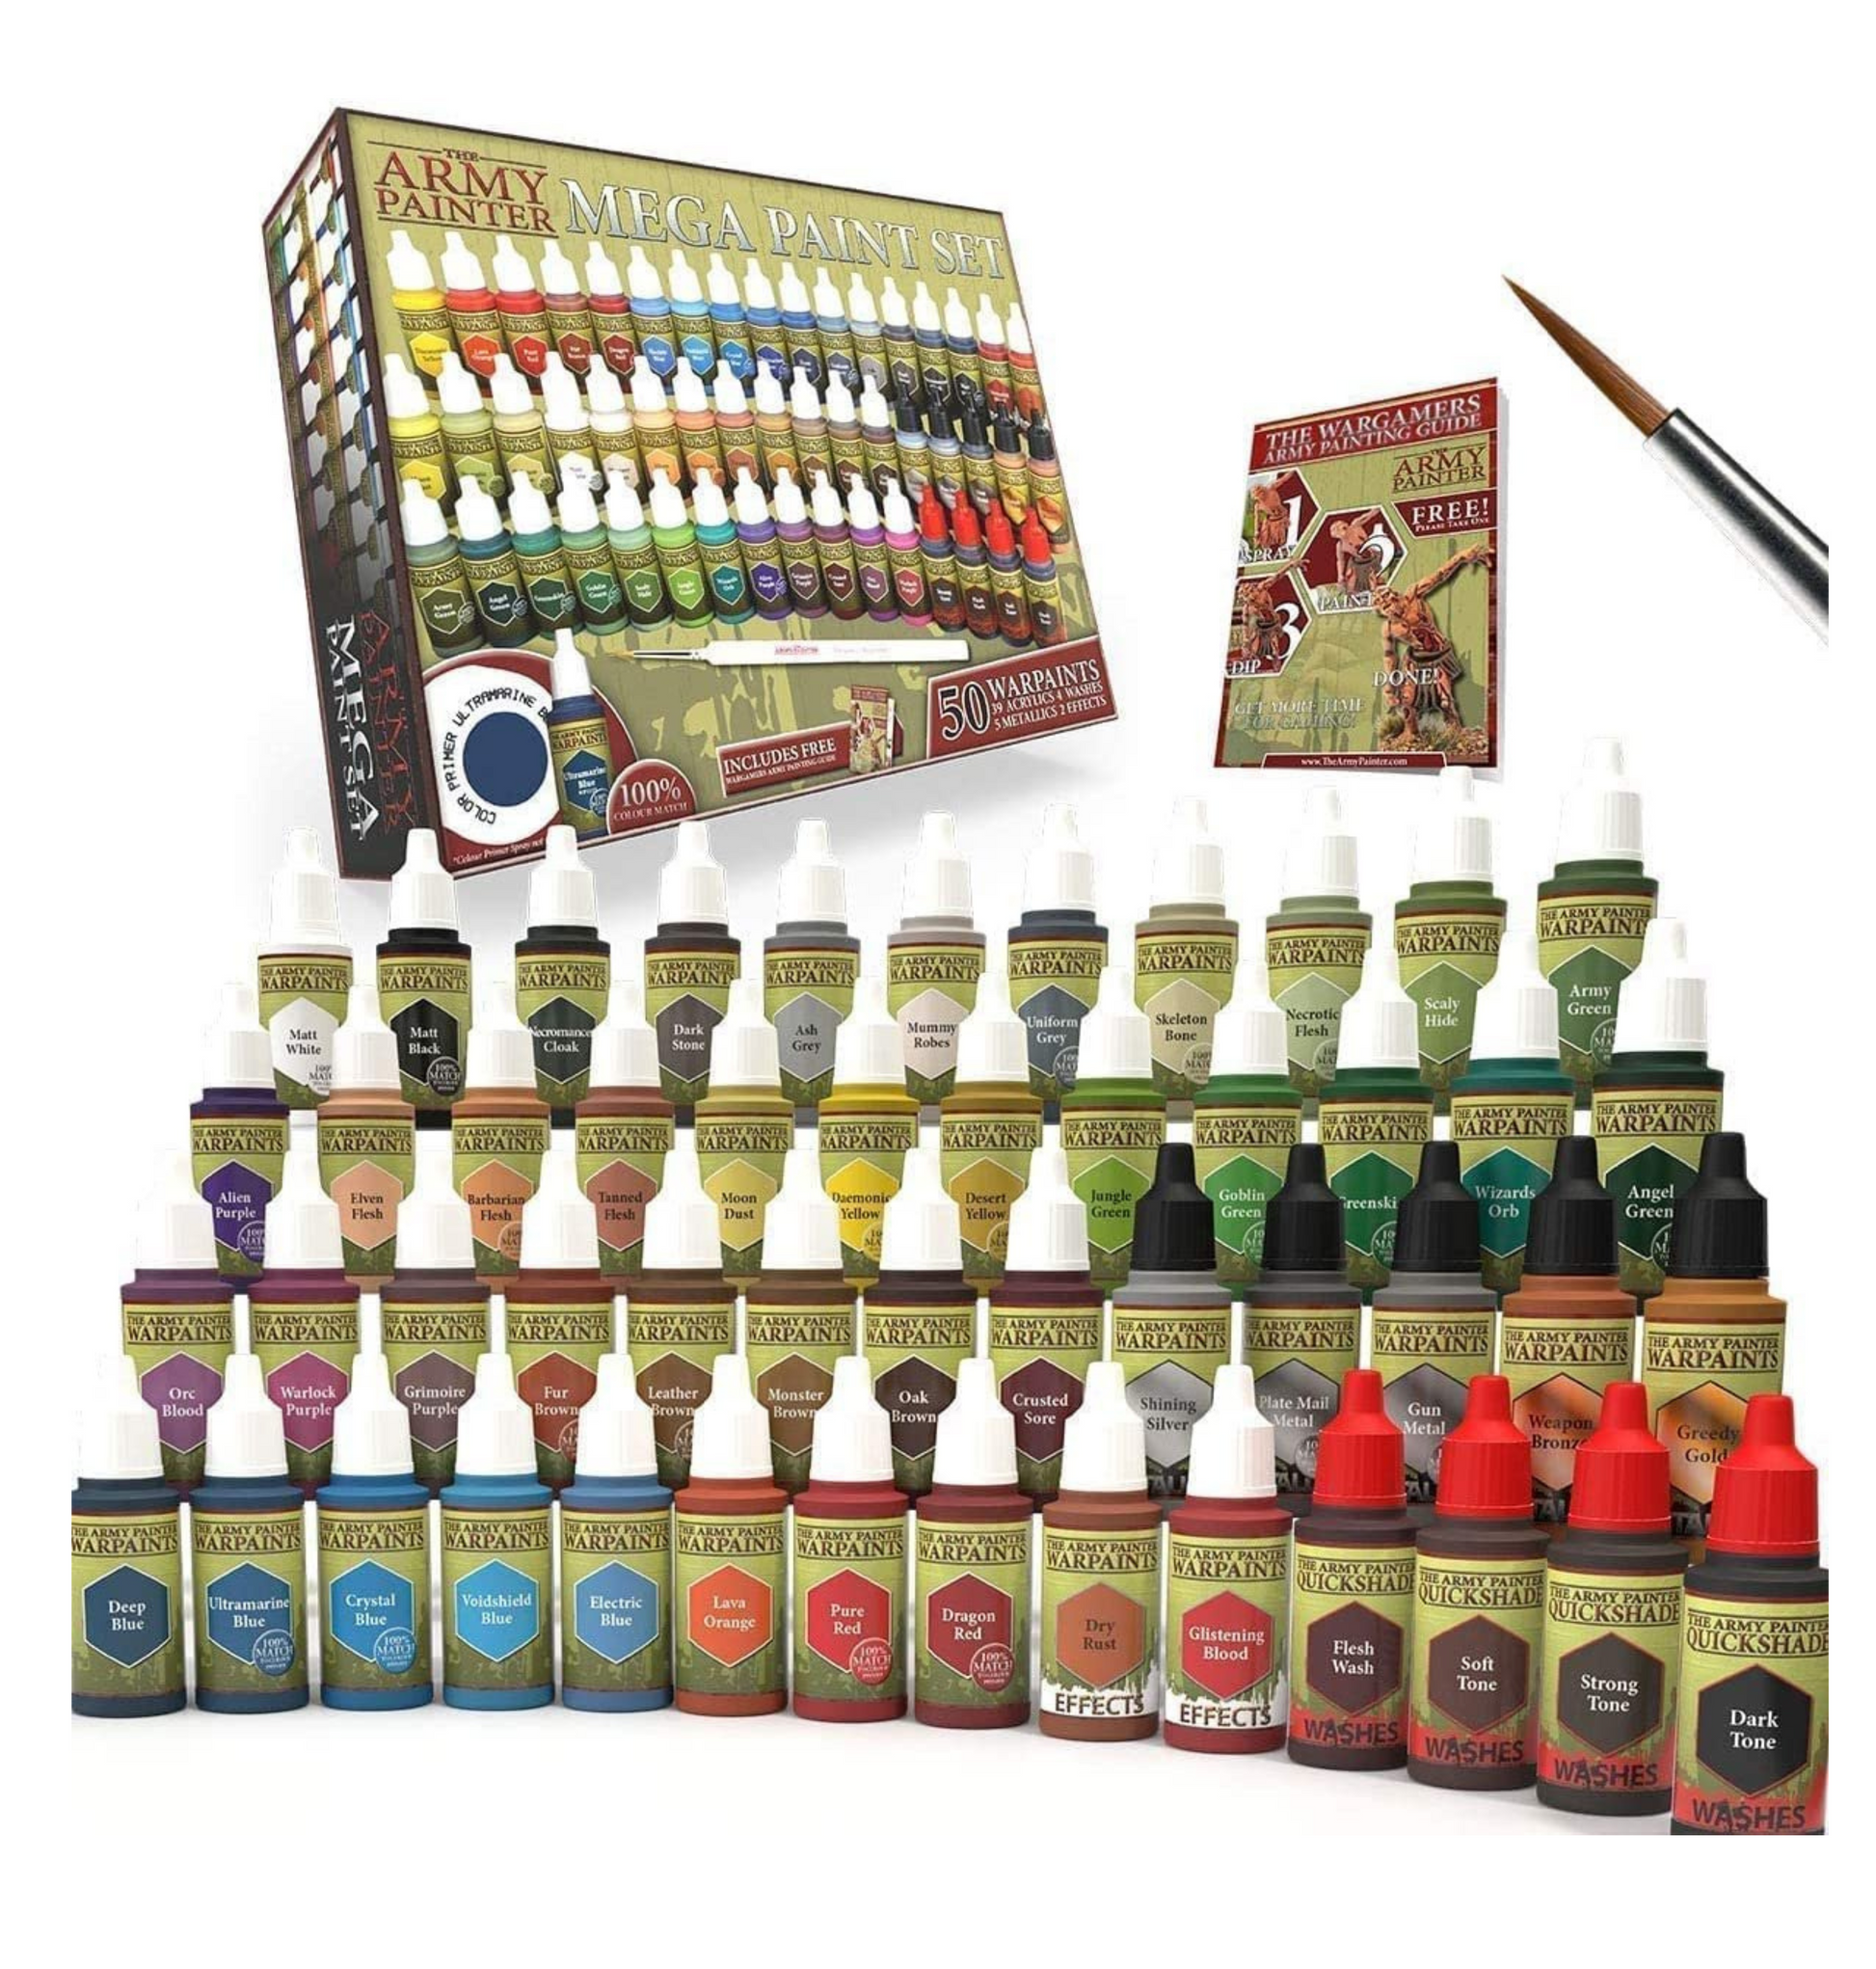 A Product Review - The Army Painter Wargames Megga Brush Set 